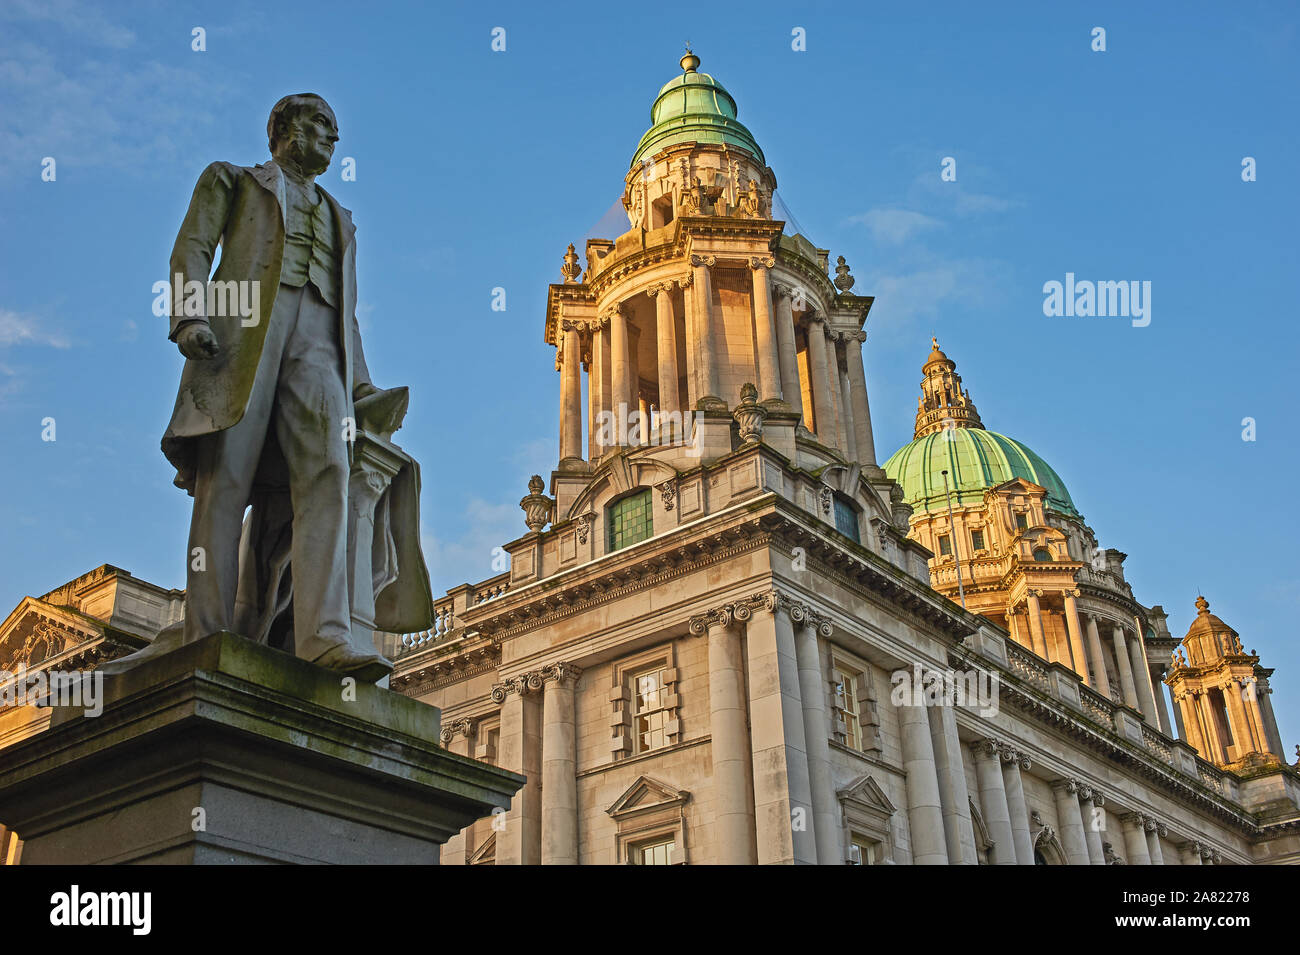 The statue of James Harland, MP for Belfast Norzh, and one part of the Harland and Woolf shipyard, stands outside City Hall in the centre of Belfast Stock Photo